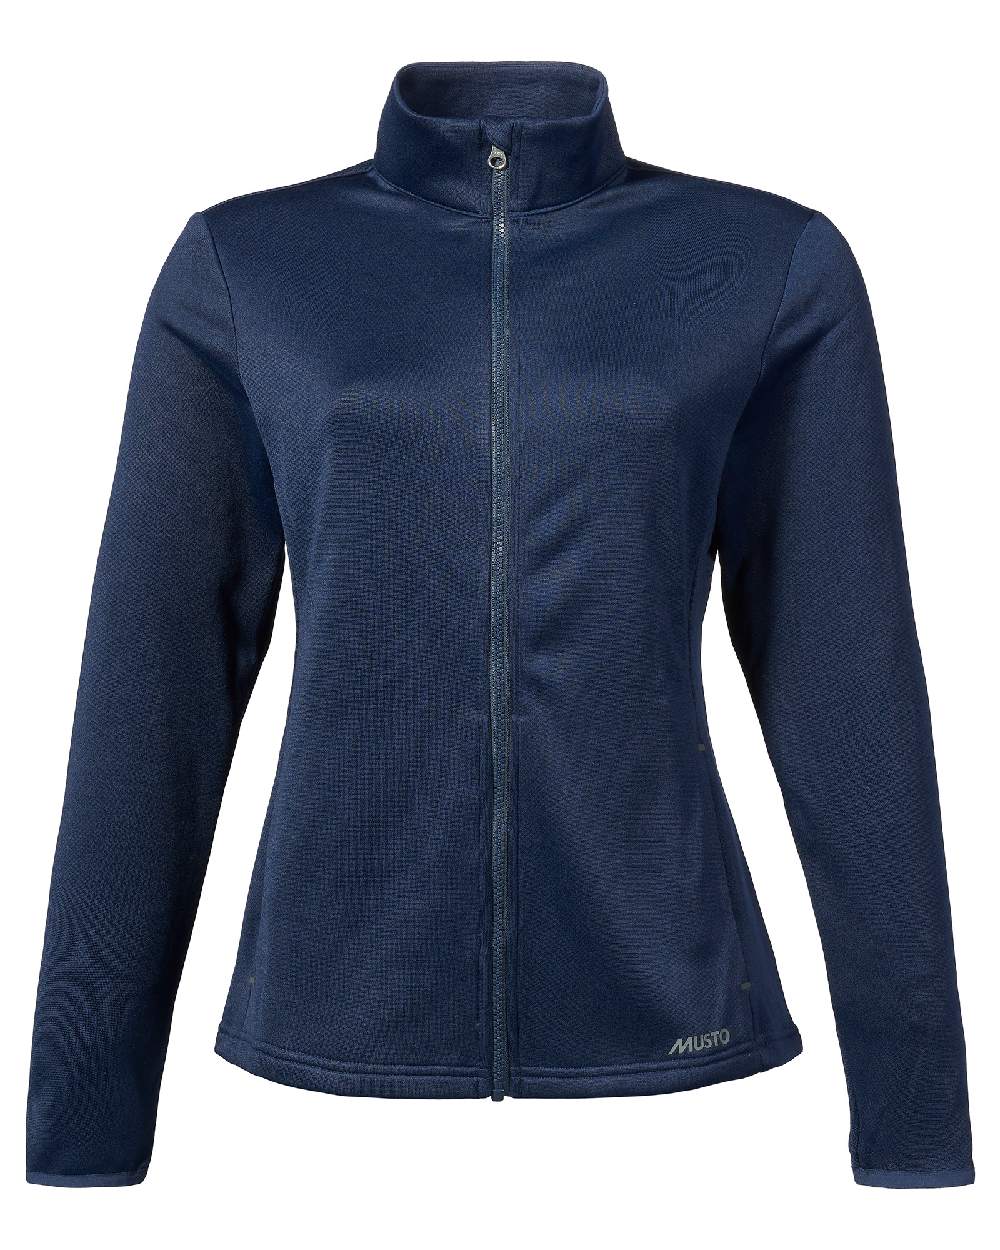 Navy coloured Musto Womens Essential Full Zip Sweater on white background 